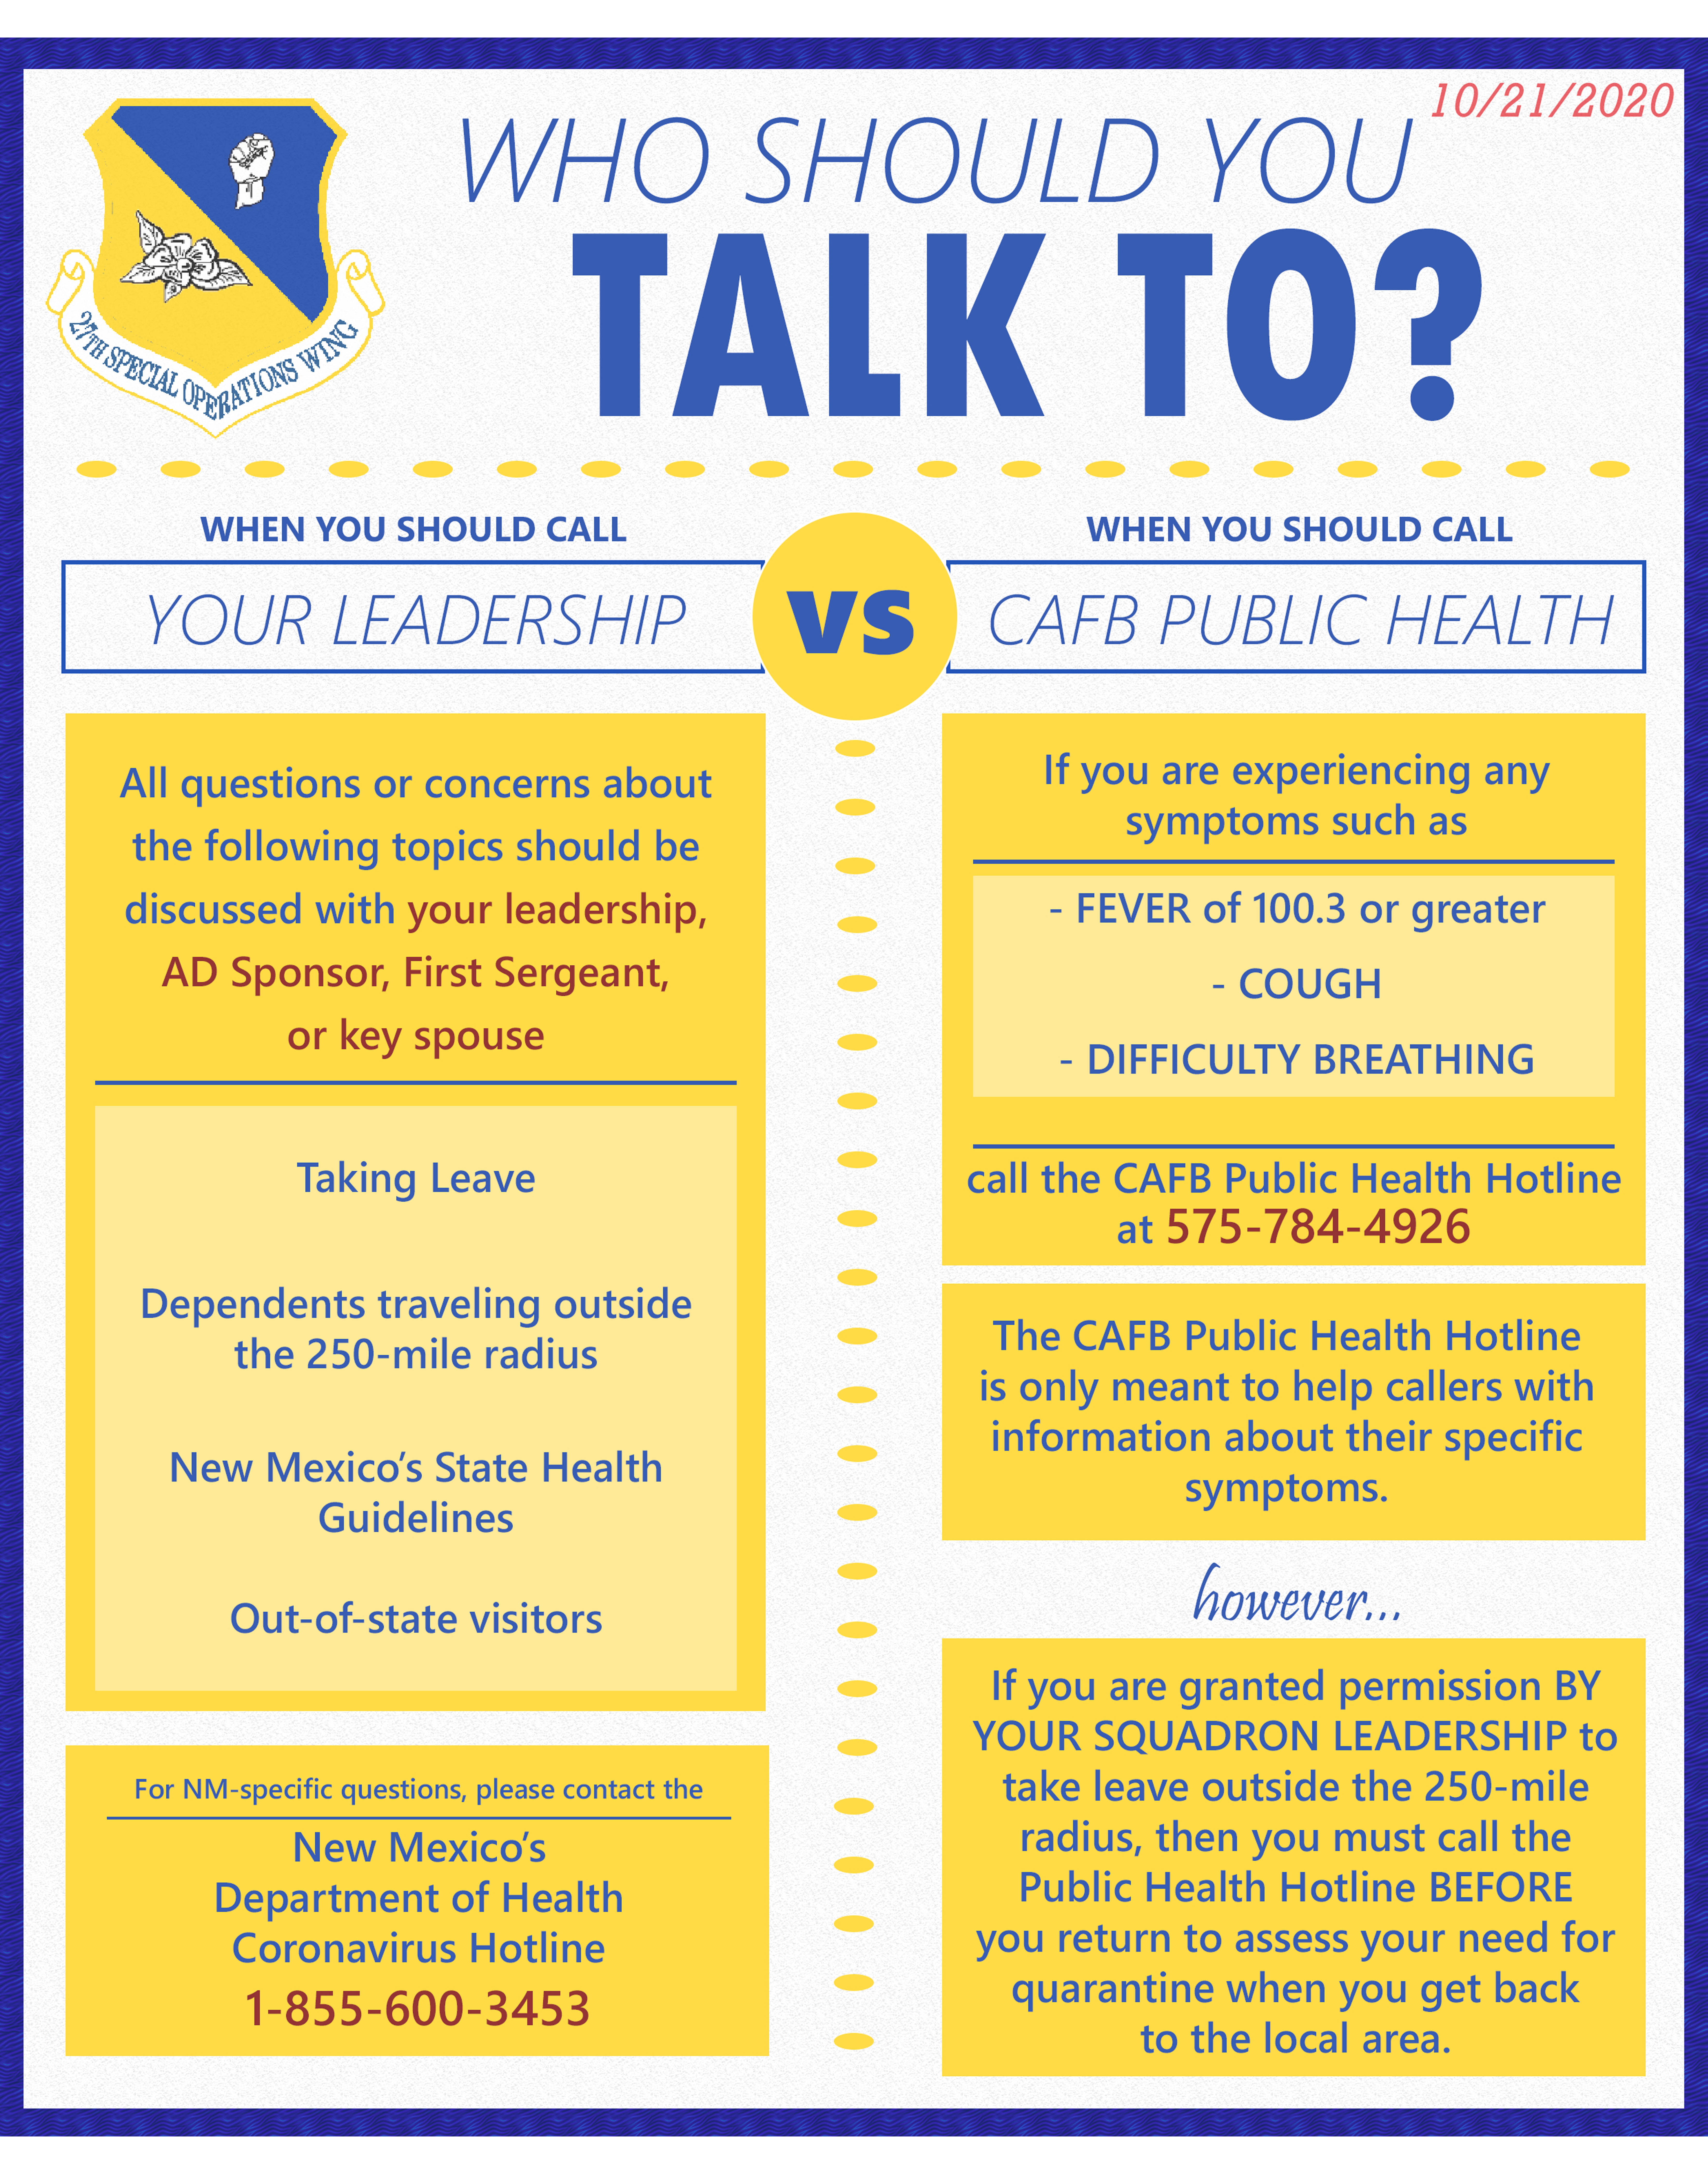 Chart on talking to leadership vs public health for COVID related questions